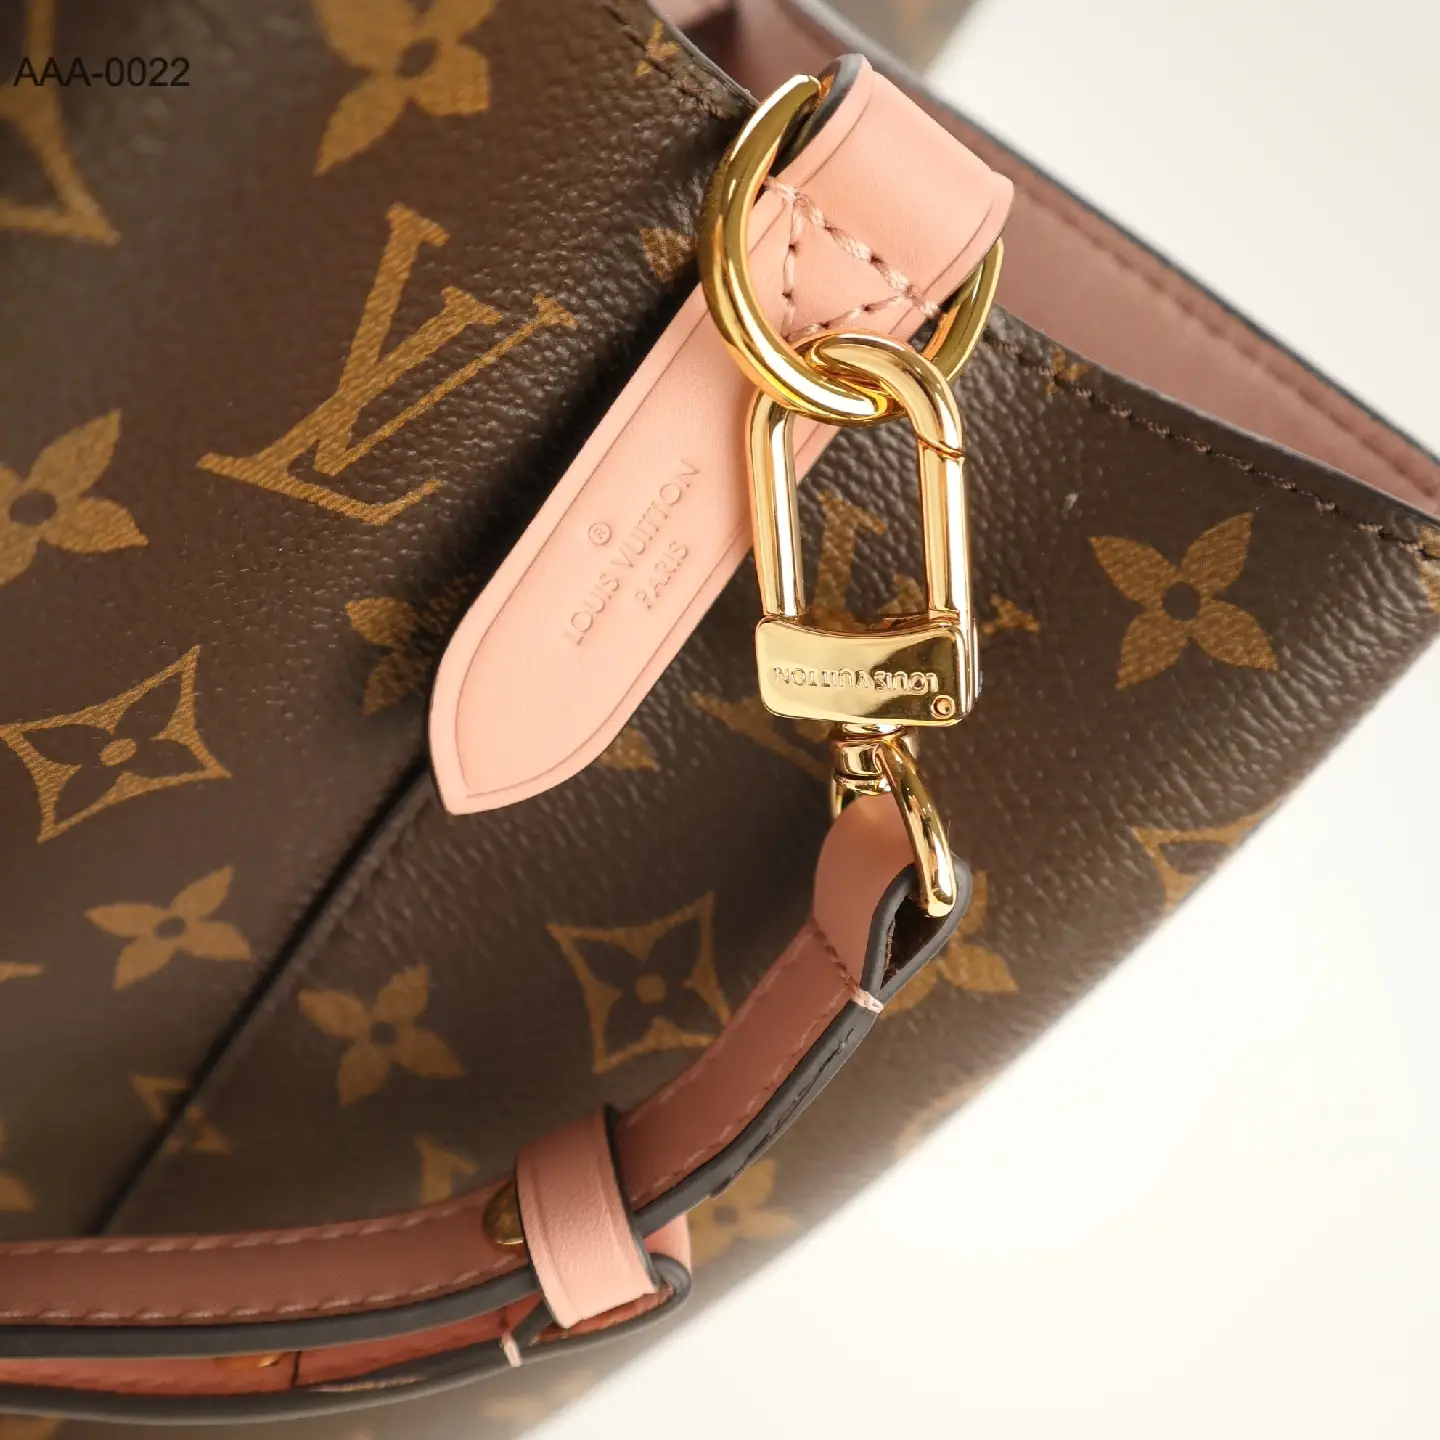 9 Louis Vuitton Neverfull Dupes That Are Even More Beautiful - The